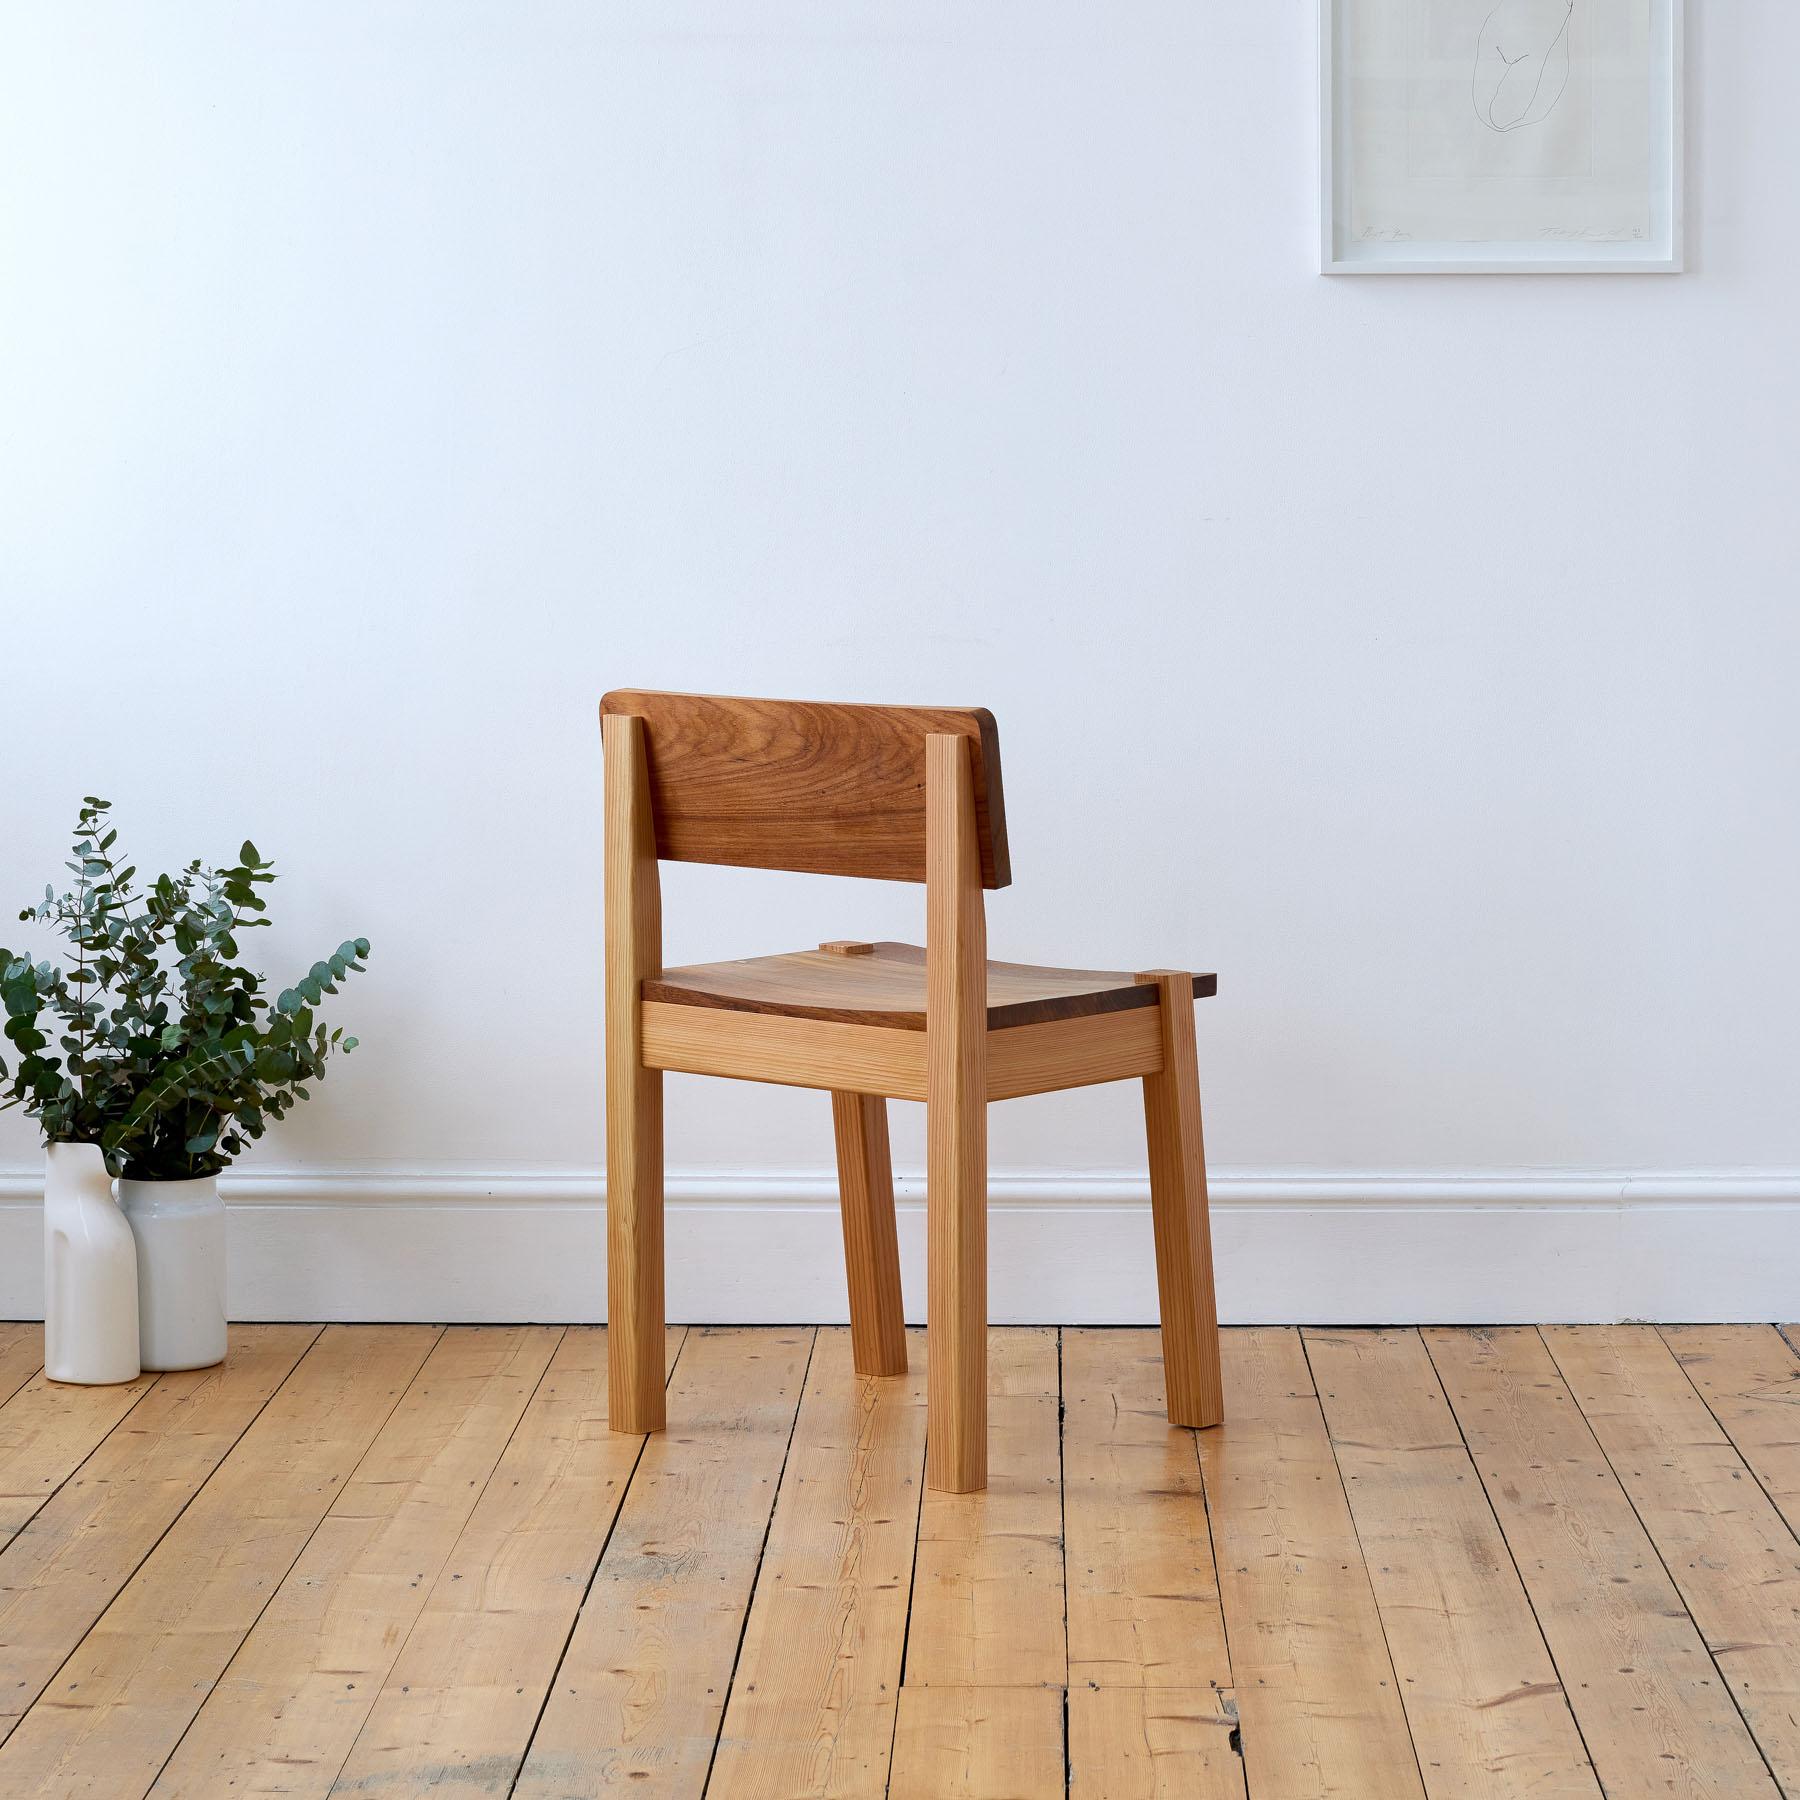 British Ayrton Chair For Sale